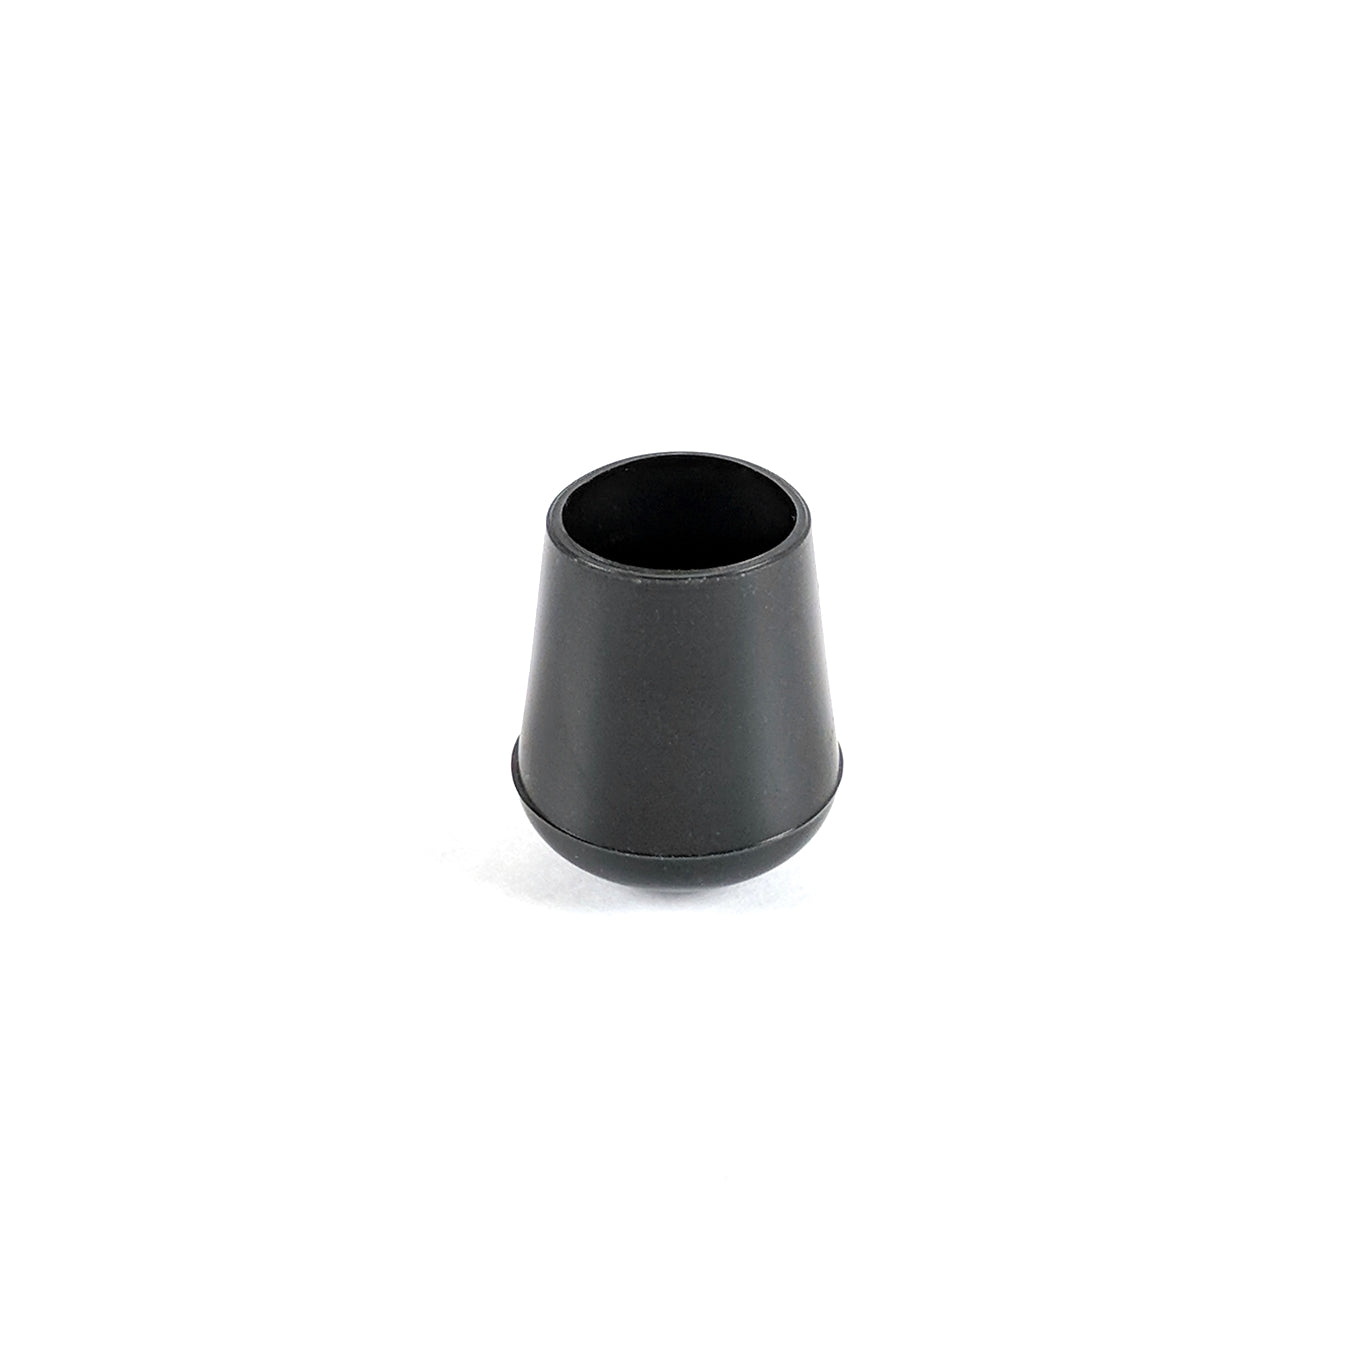 14mm Black Rubber Ferrules with Steel Base Insert - Made in Germany - Keay Vital Parts